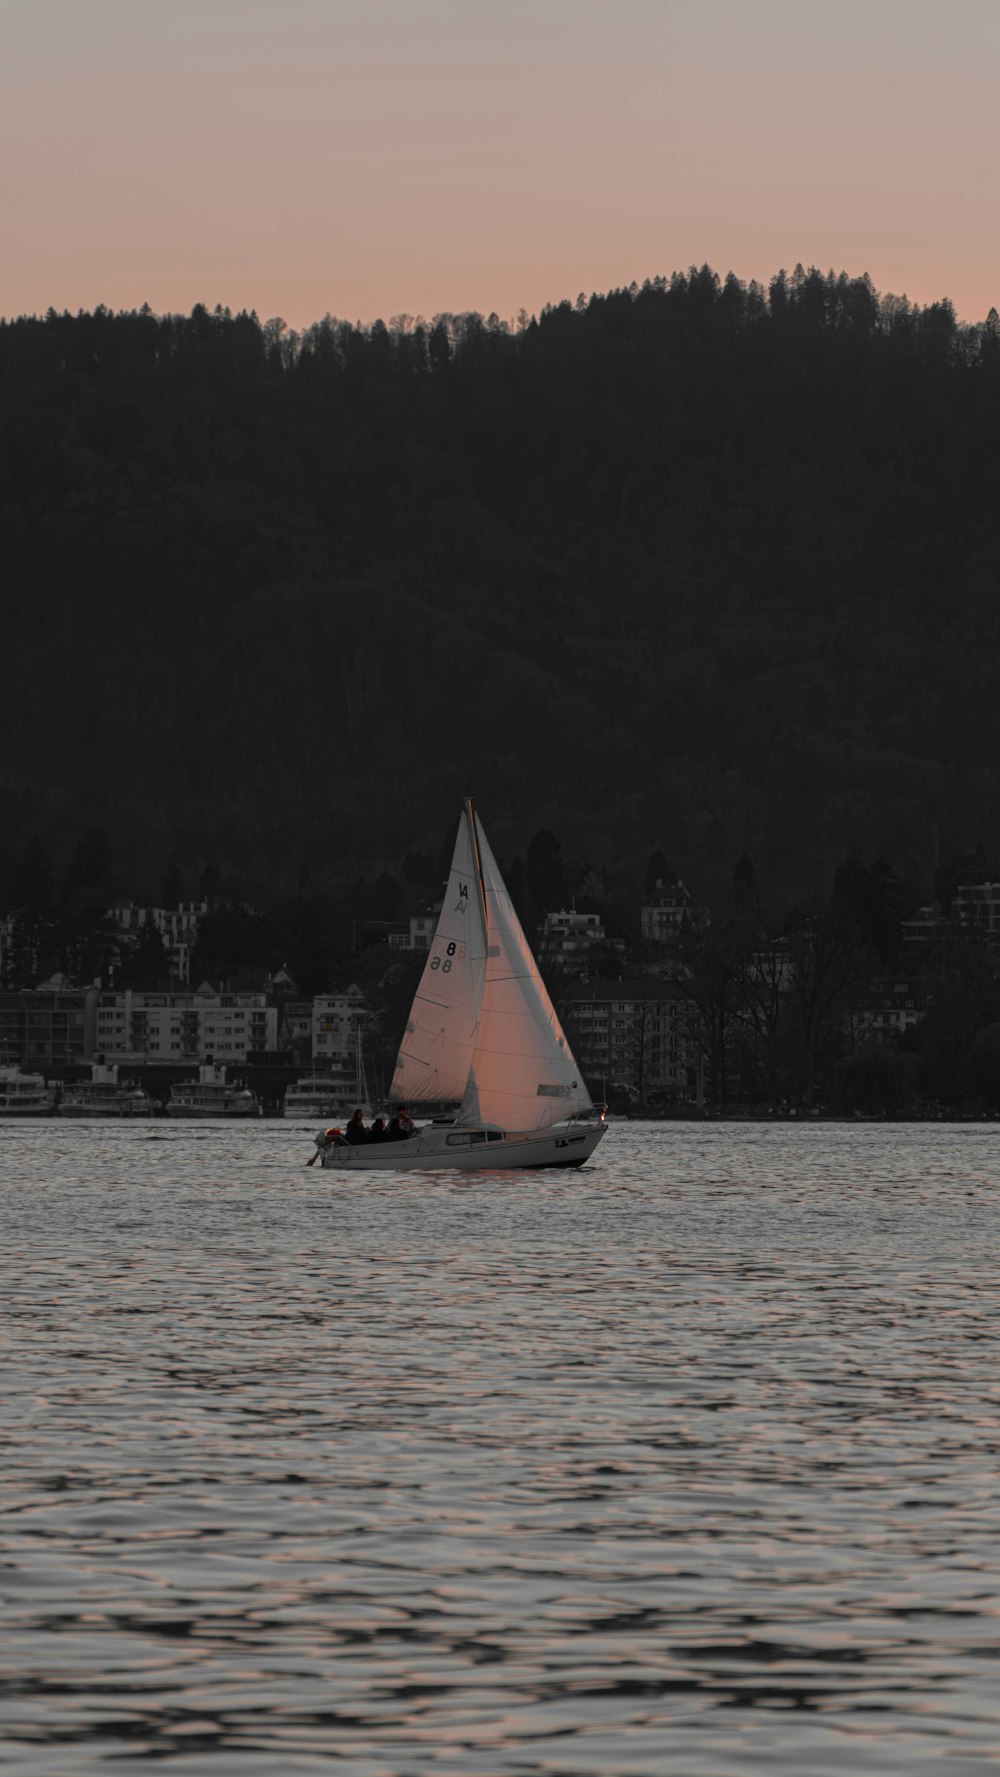 a small sailboat in a large body of water